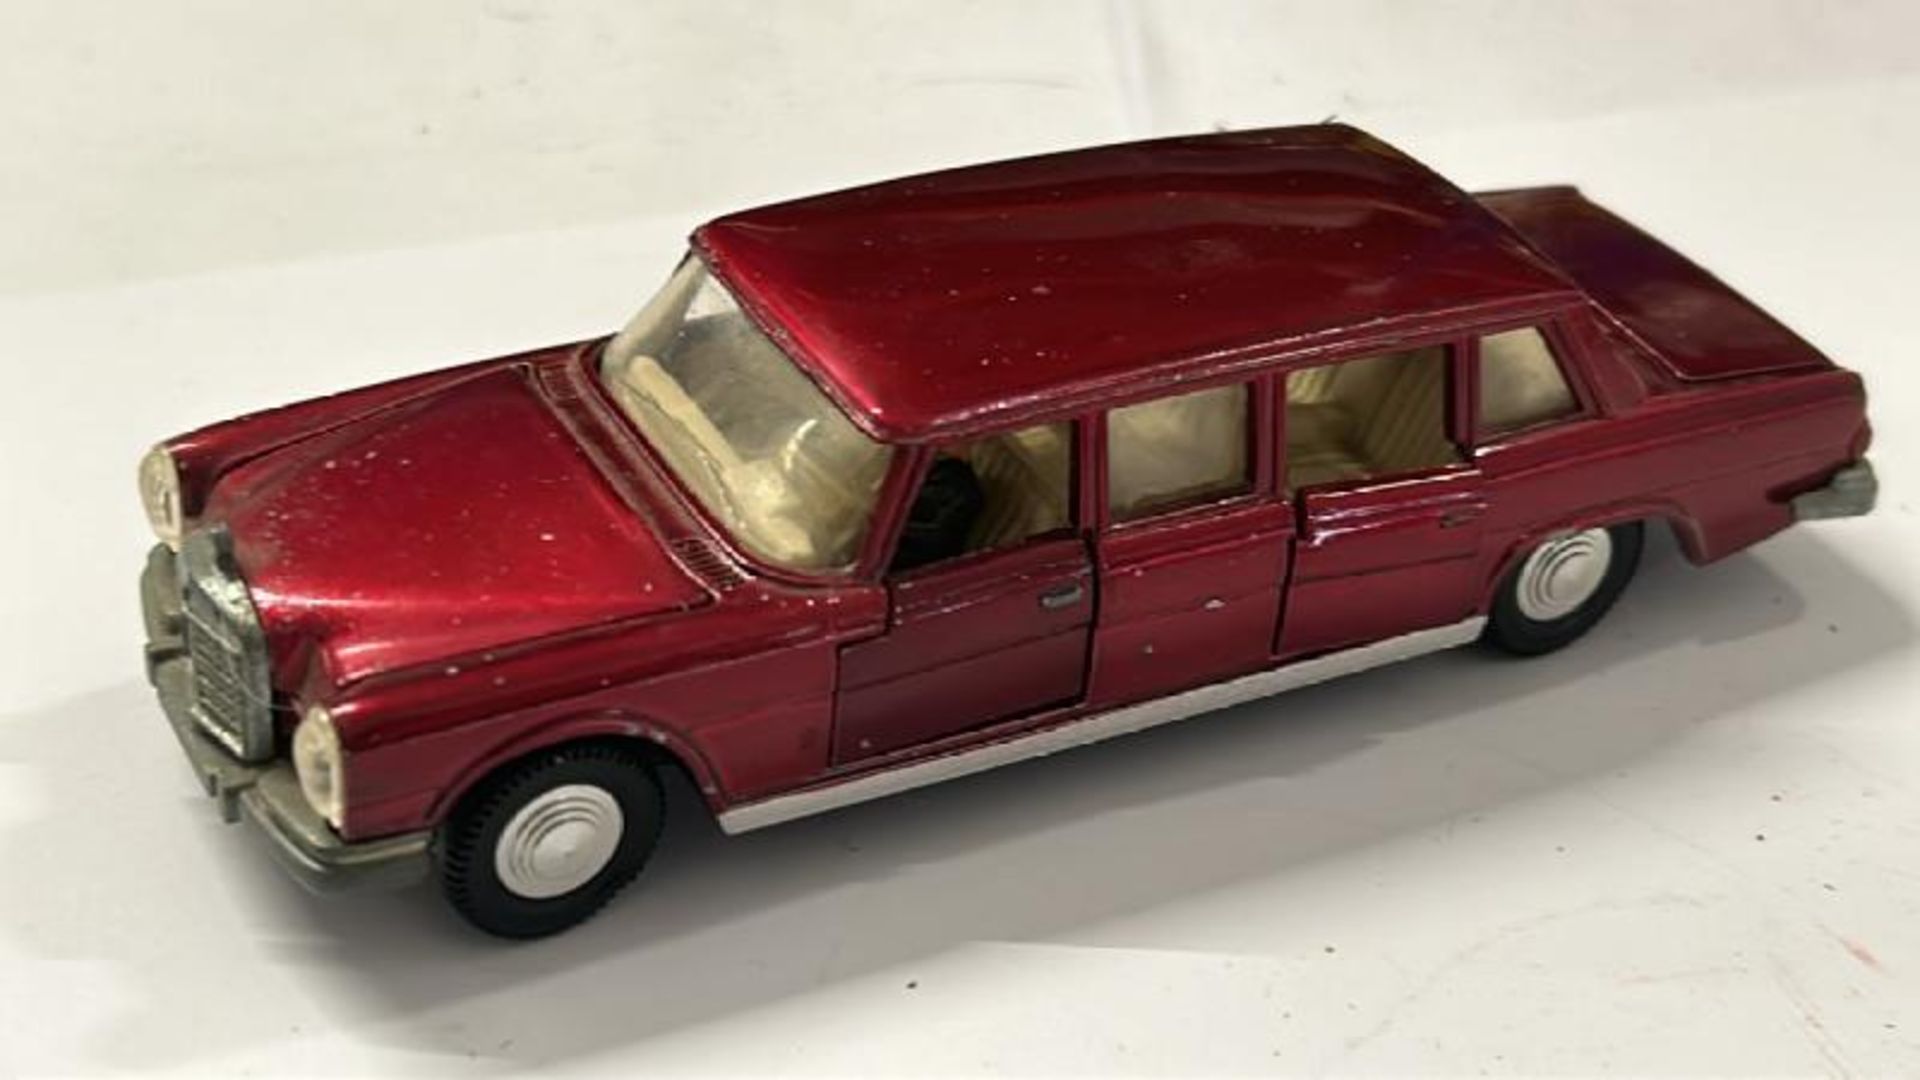 Unboxed Dinky & Corgi cars and caravans including Corgi Silver Shadow Rolls Royce and Dinky Rolls - Image 8 of 23